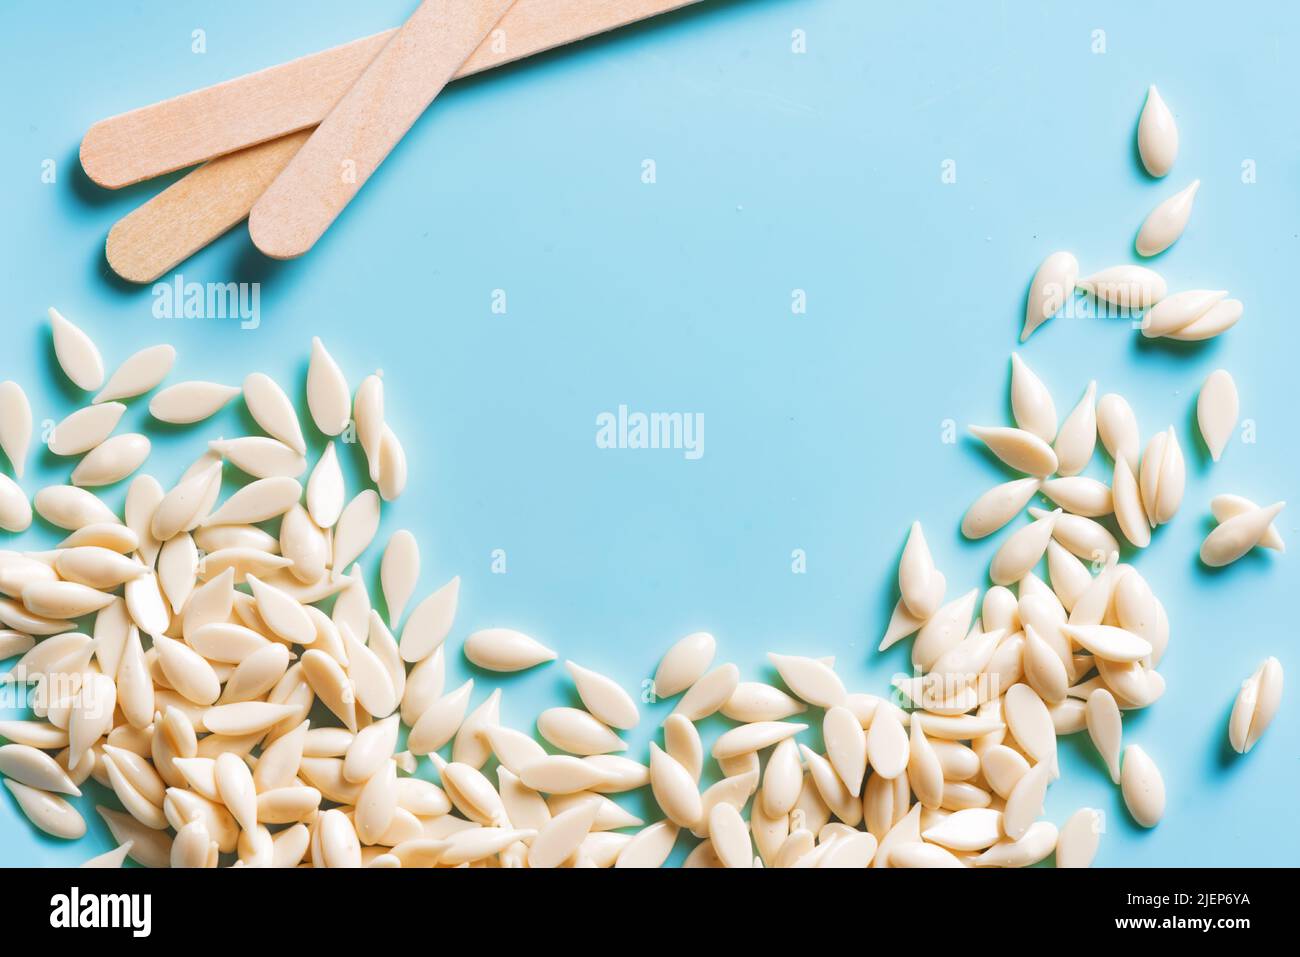 Natural depilatory film wax bean granules and wooden spatula on blue background close up. Hair removal, natural beauty concept,  pearl wax. Stock Photo